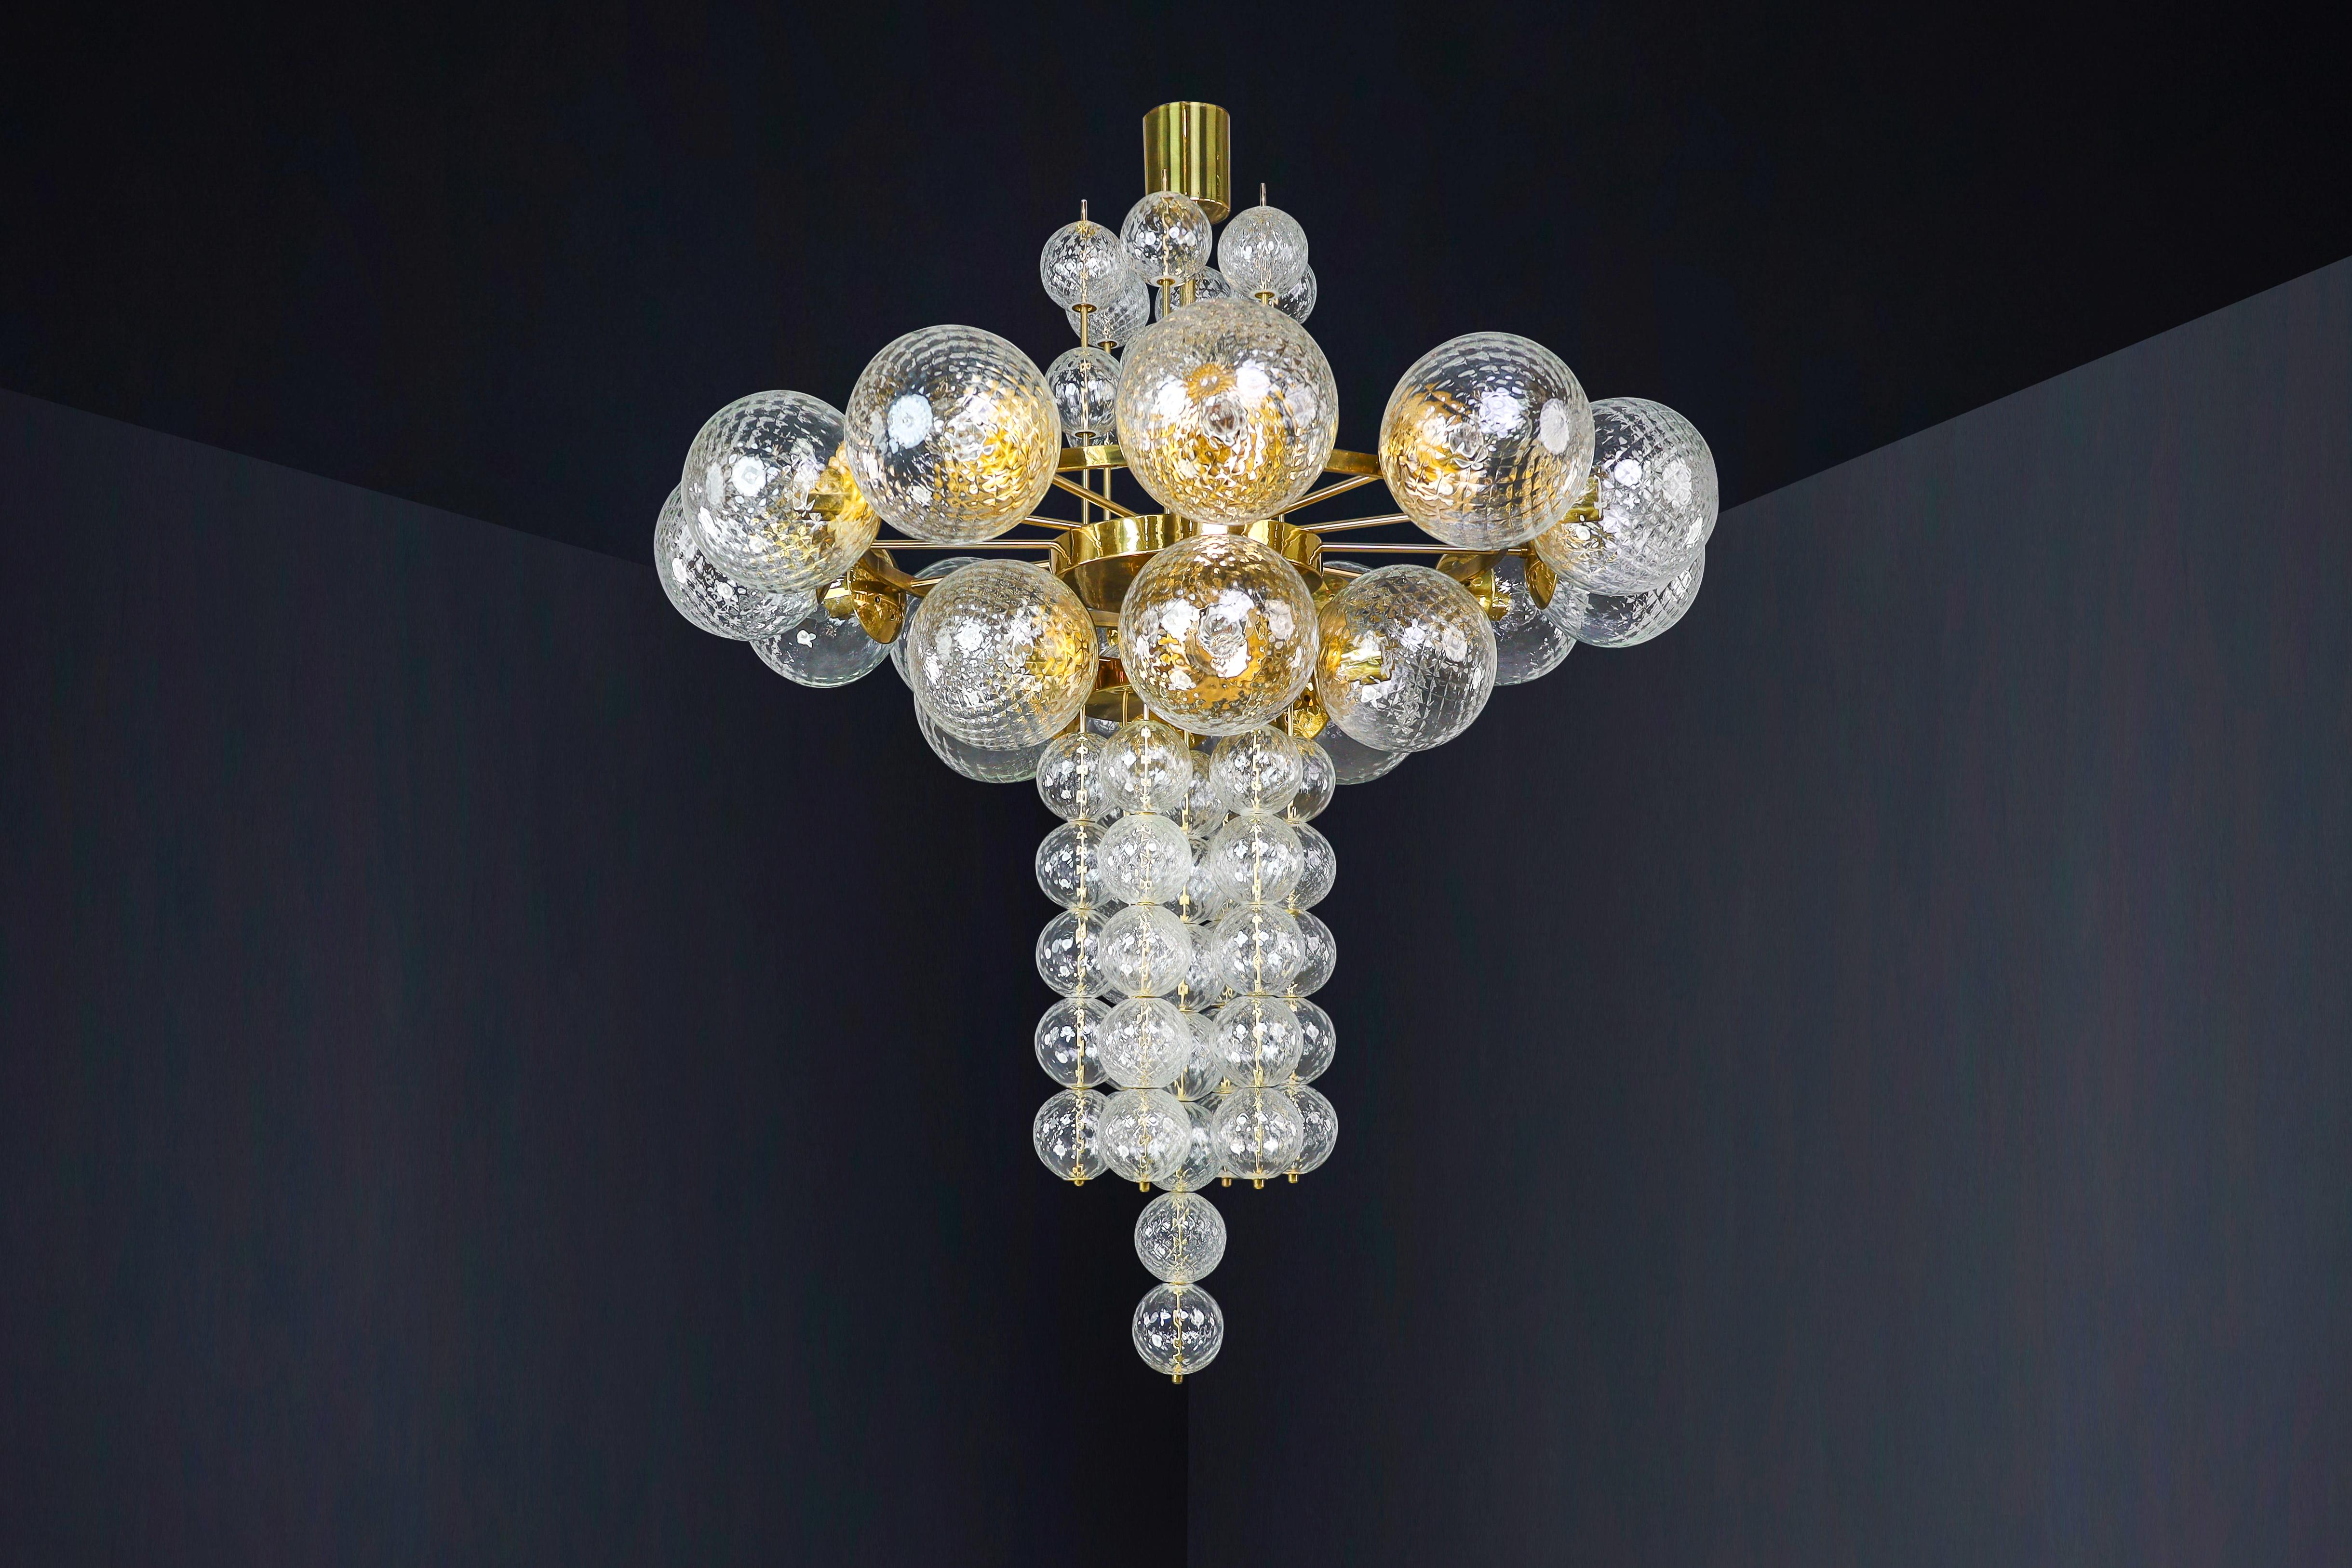 Large Chandelier with brass fixture and hand-blowed glass globes by Preciosa Cz. For Sale 3